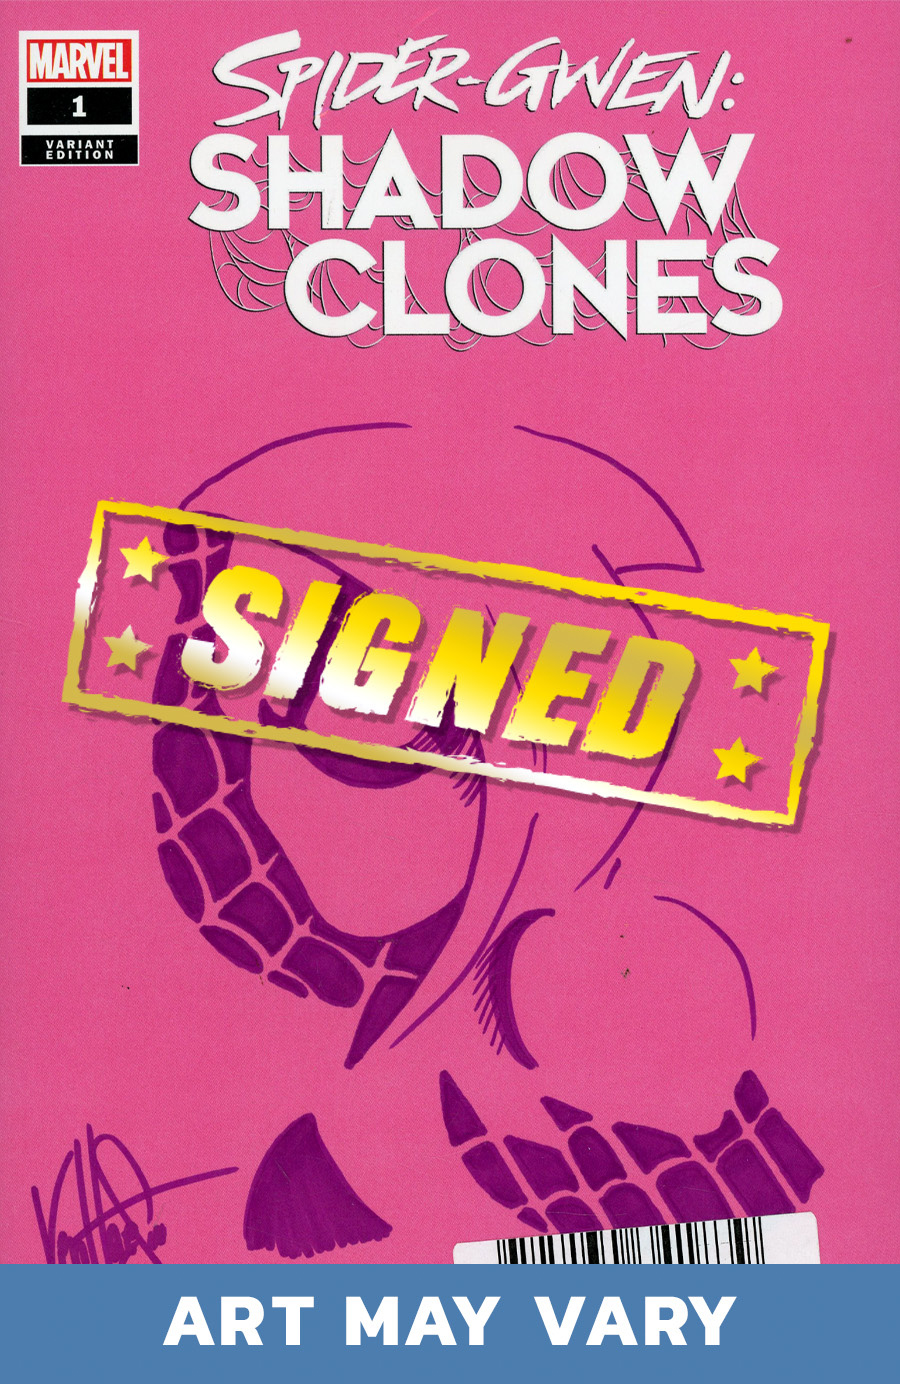 Spider-Gwen Shadow Clones #1 Cover Q DF Pink Blank Variant Cover Art Signed & Remarked By Ken Haeser With A Purple Spider-Gwen Hand-Drawn Sketch